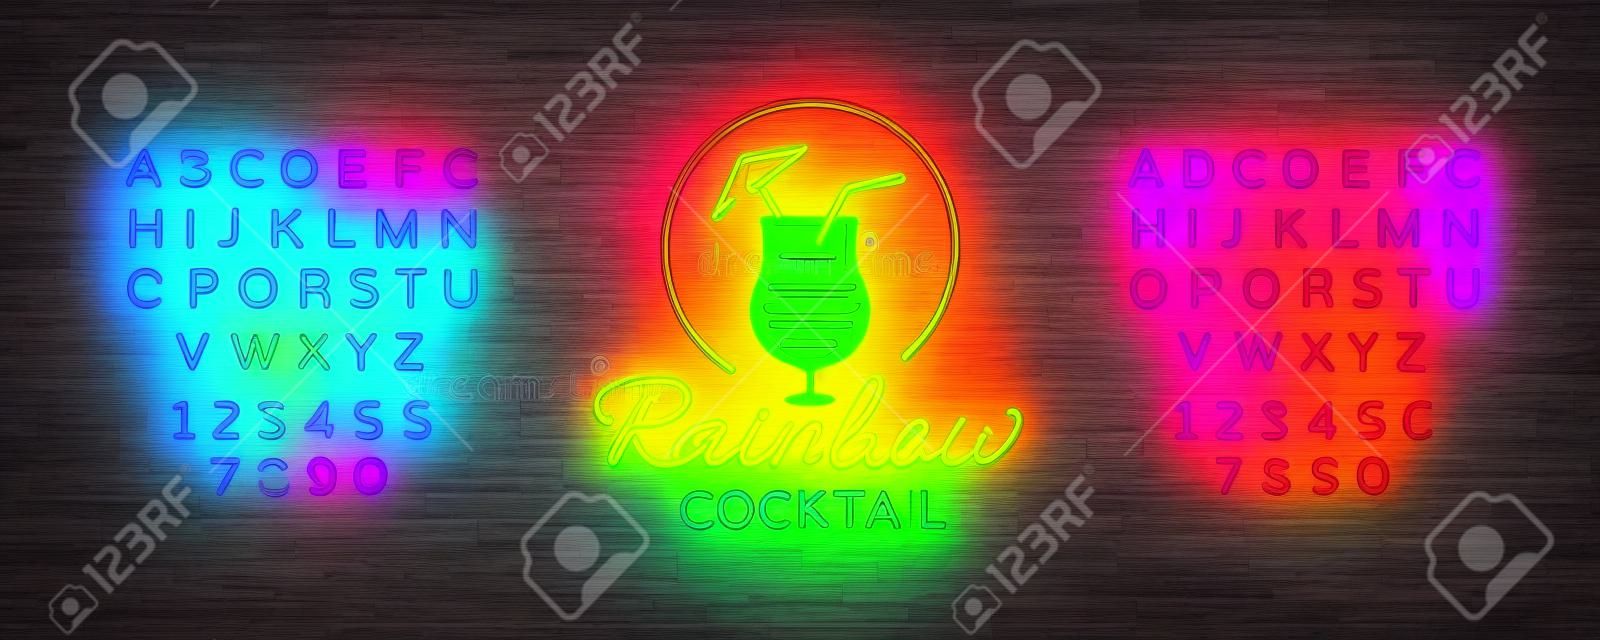 Cocktail logo in neon style. Rainbow Cocktail. Neon sign, Design template for drinks, alcoholic. Light banner, Bright advertising for cocktail bar, party. Vector illustration. Editing text neon sign.